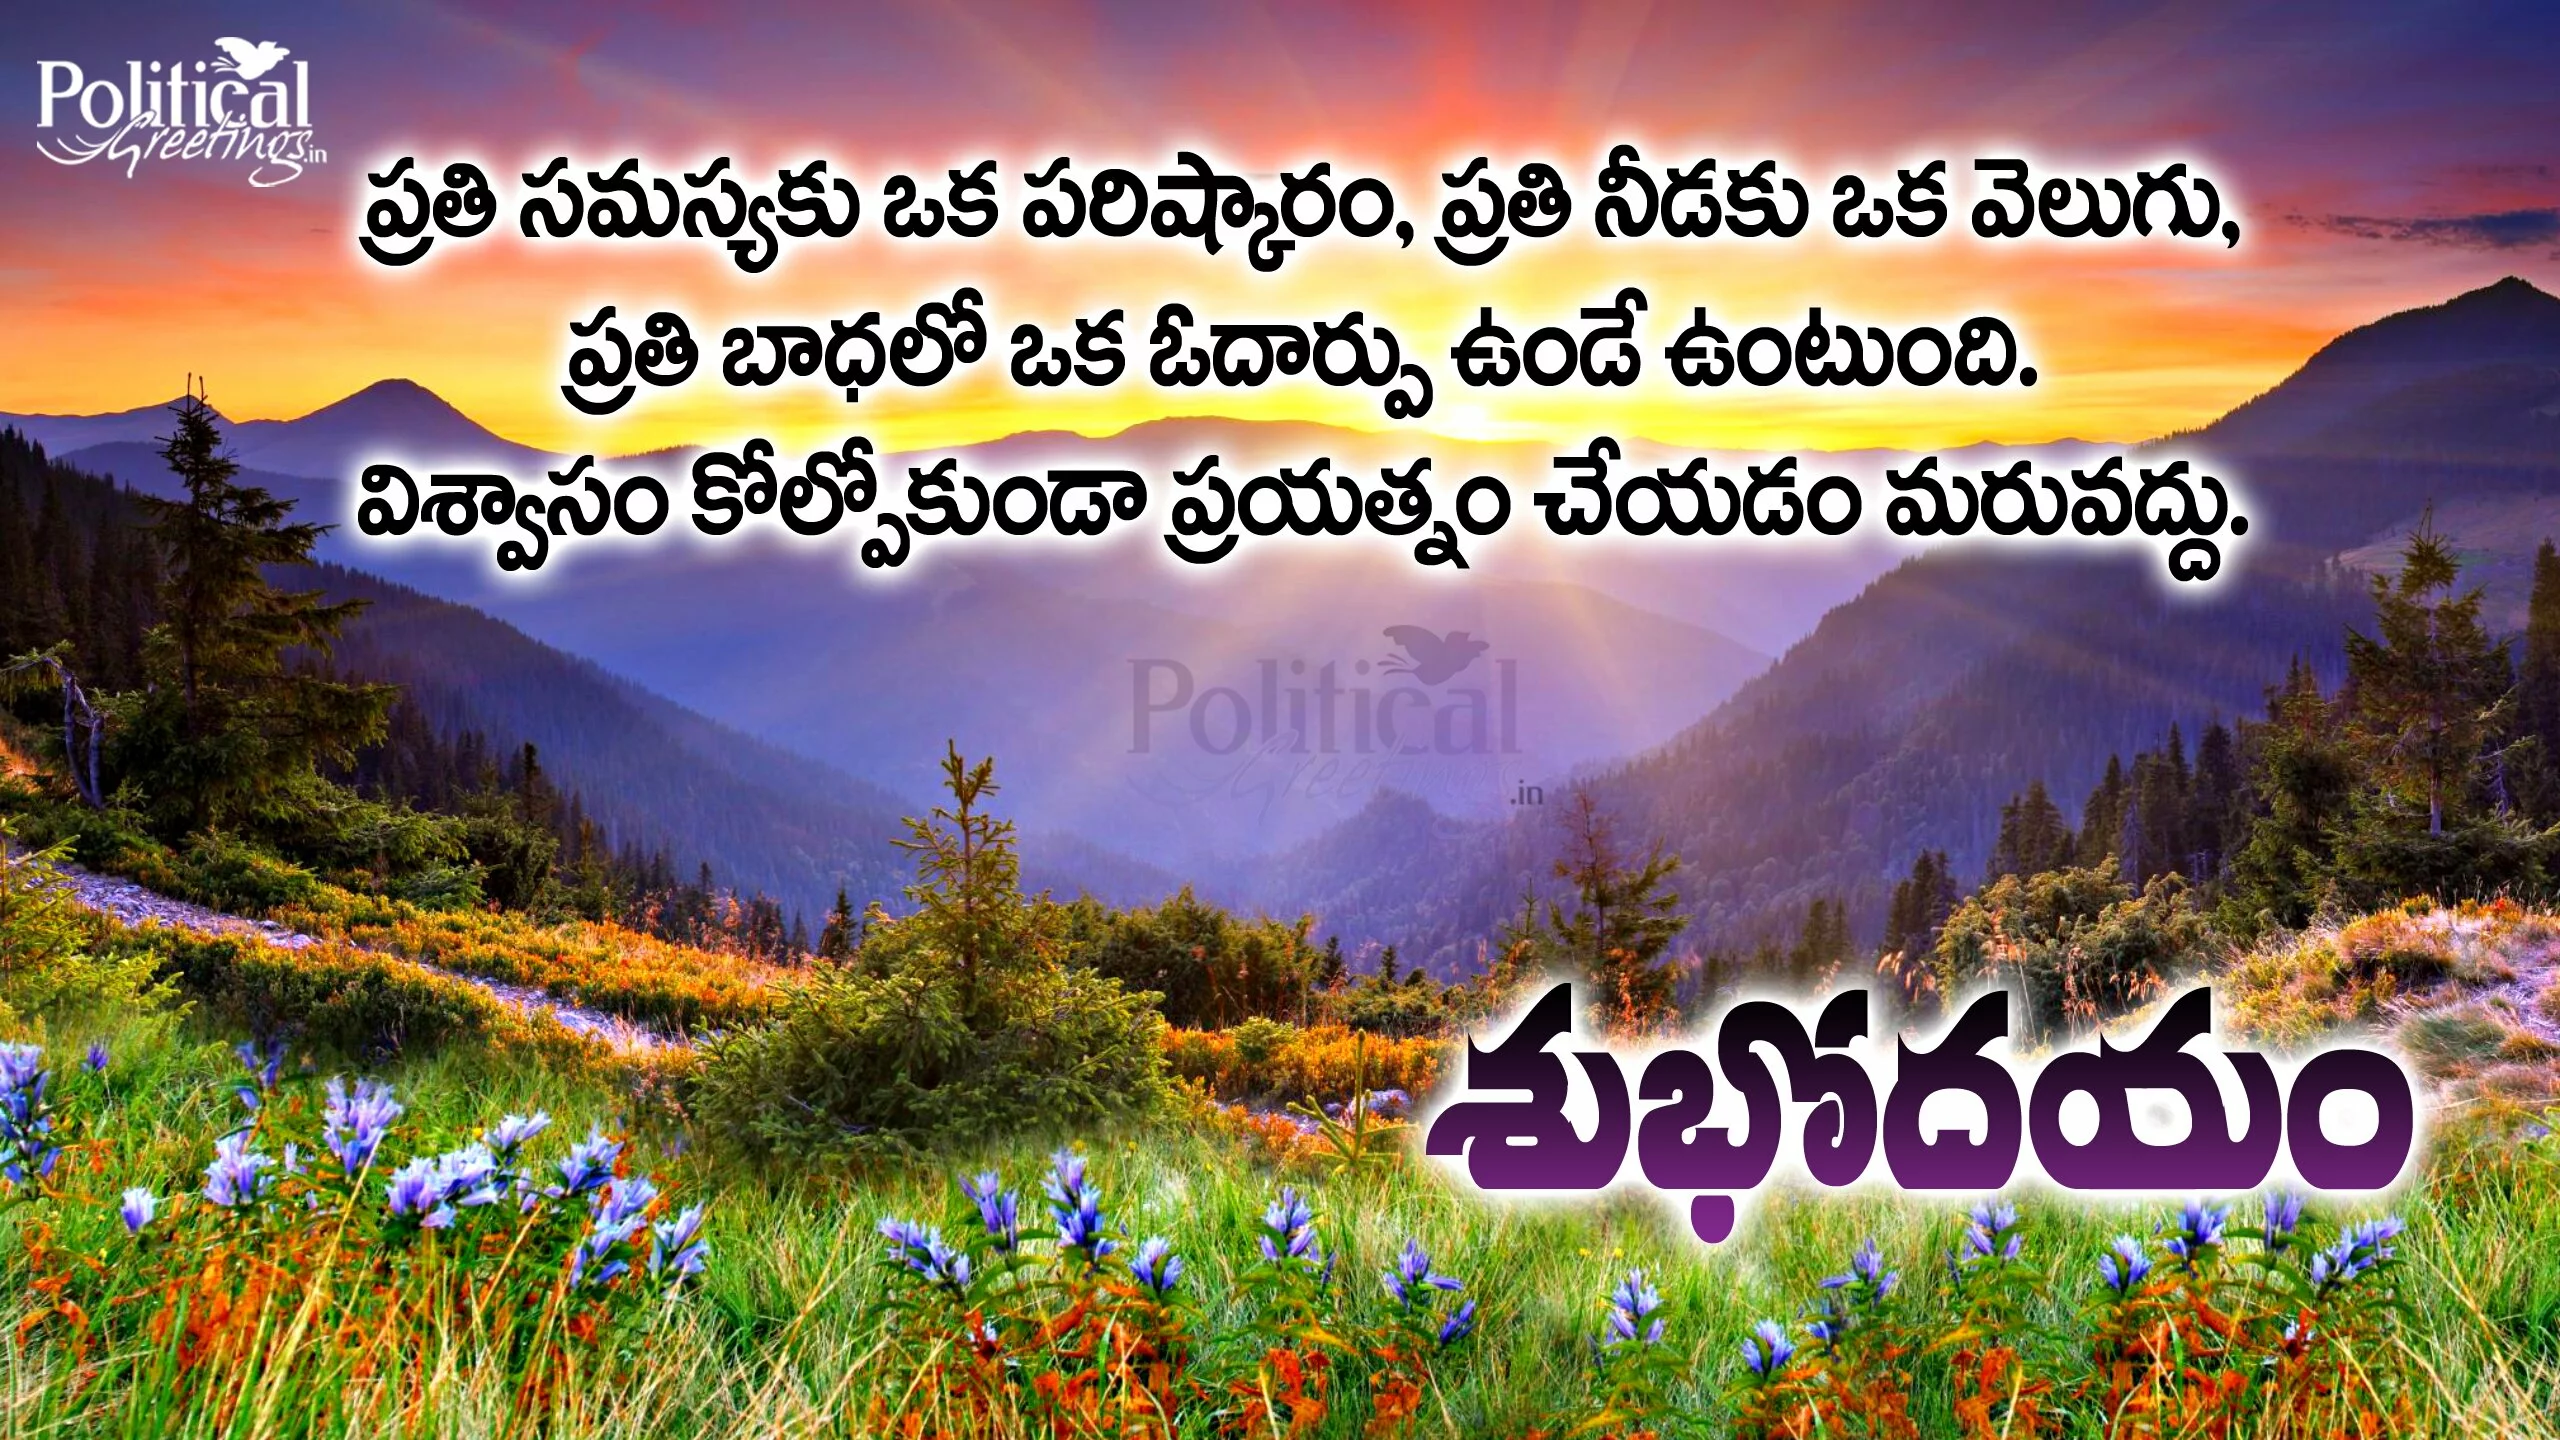 best-good-morning-telugu-quotes-and-greetings-wishes1-politicalgreetings-copy